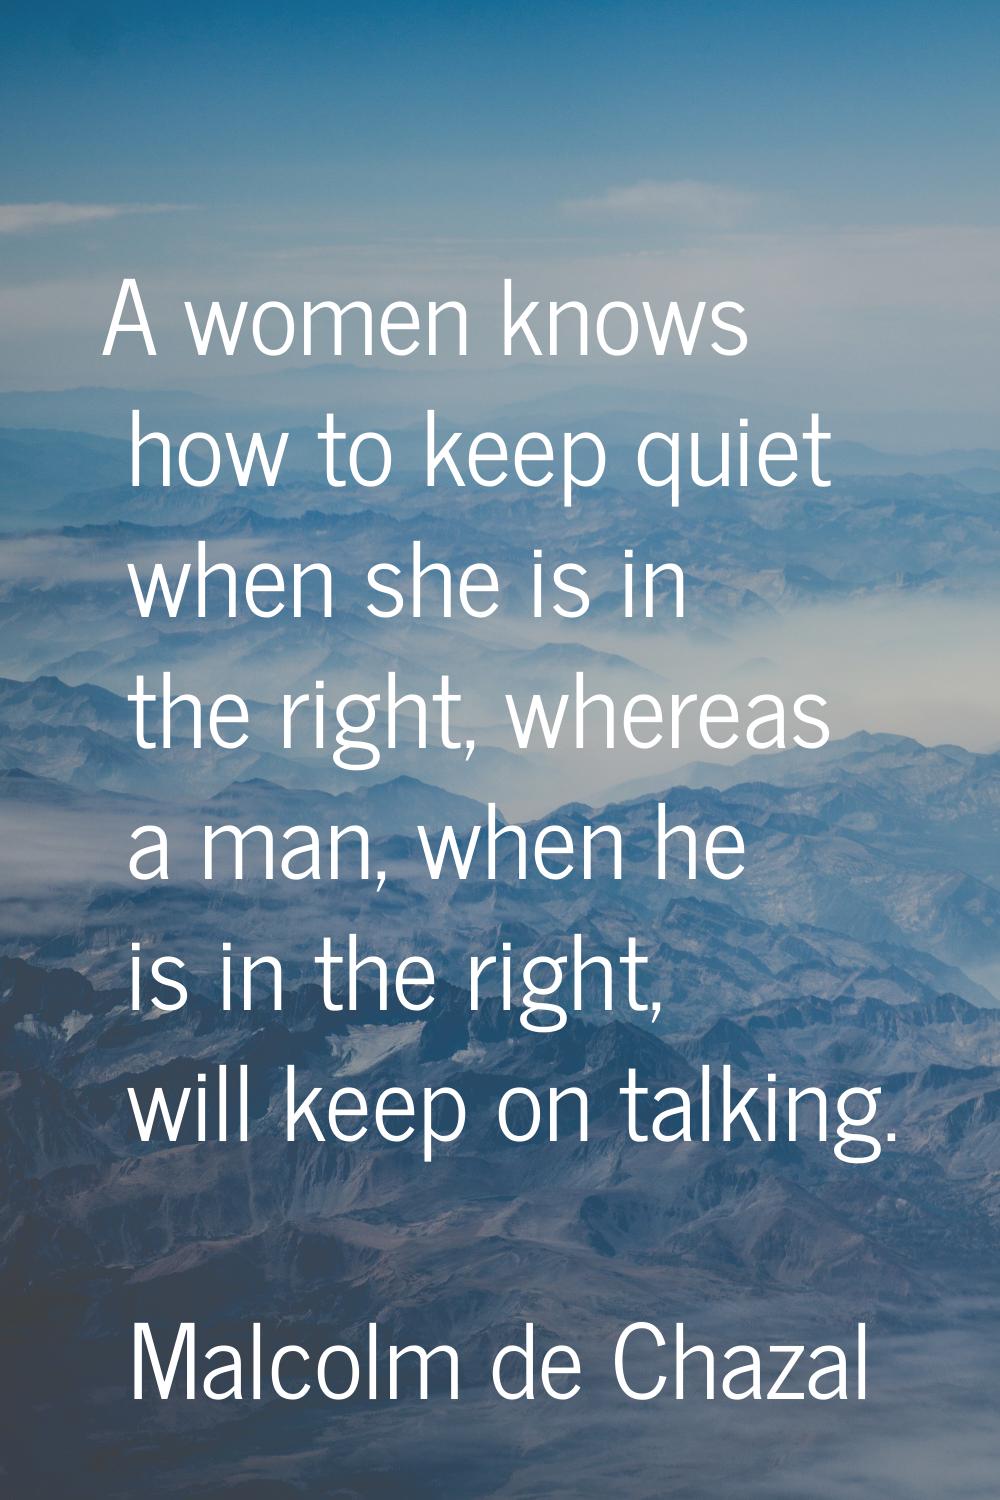 A women knows how to keep quiet when she is in the right, whereas a man, when he is in the right, w